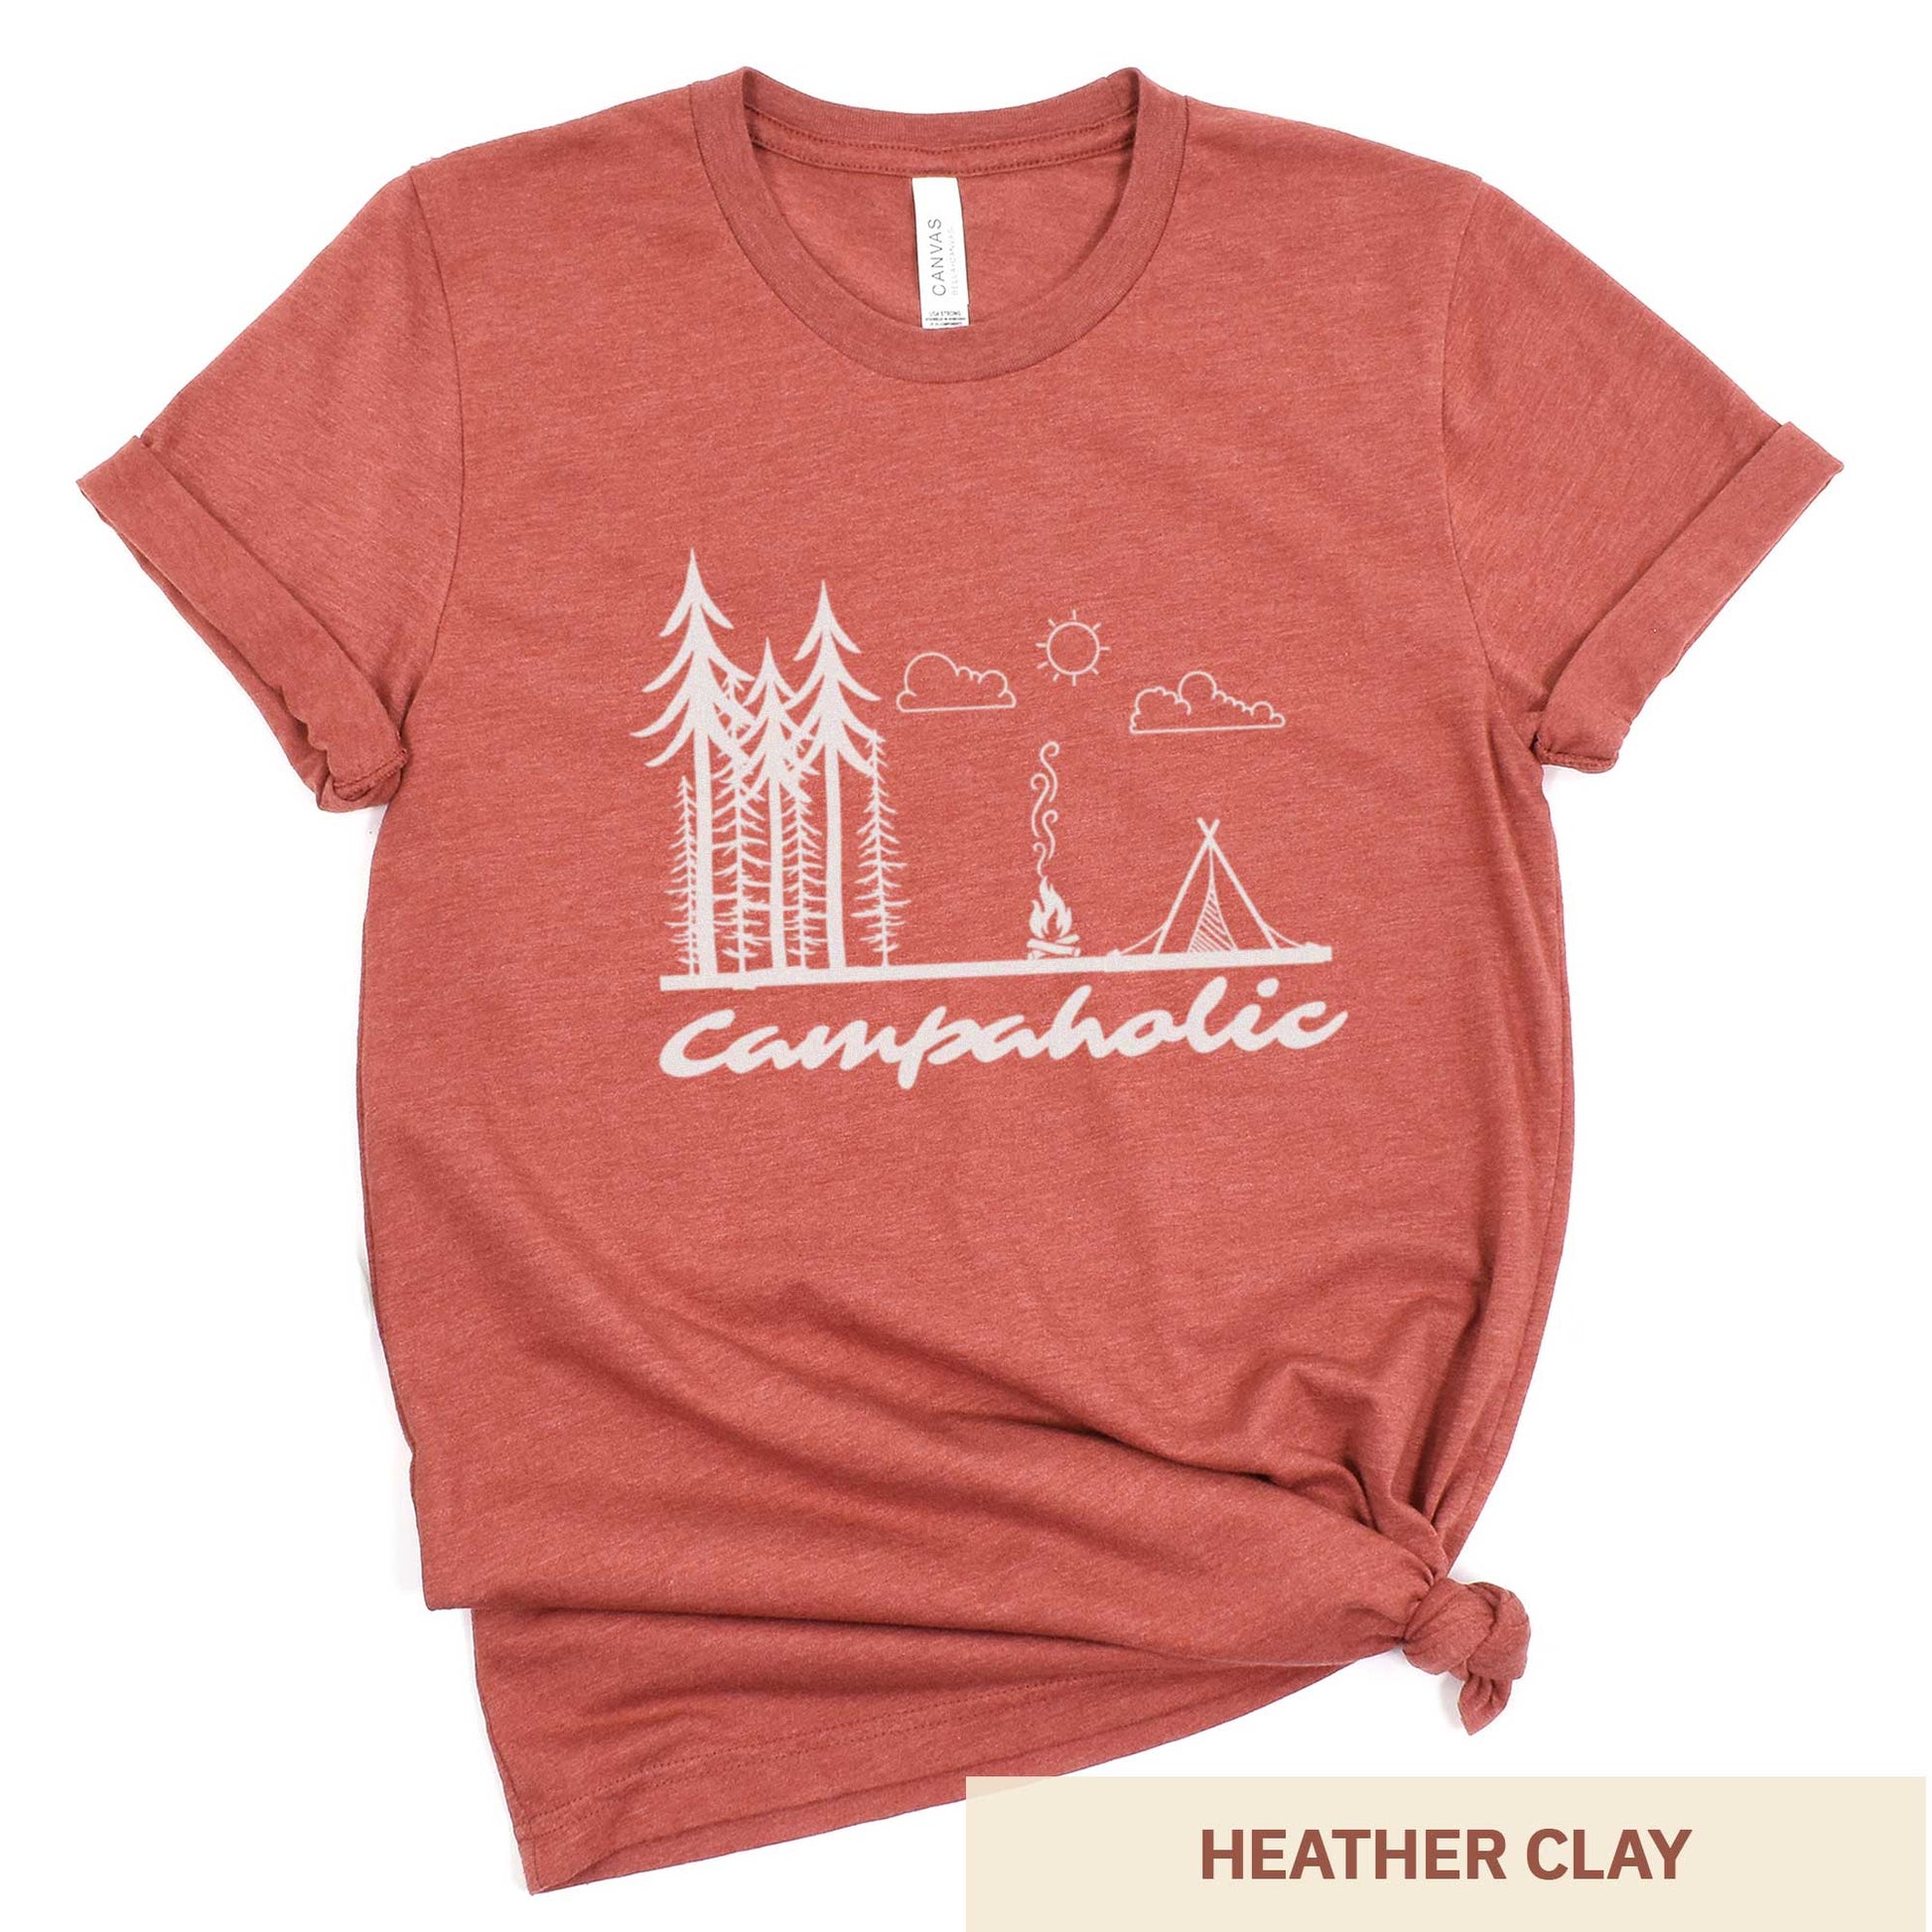 A heather clay Bella Canvas t-shirt surrounded by hiking gear featuring a tent, trees and the words campaholic.